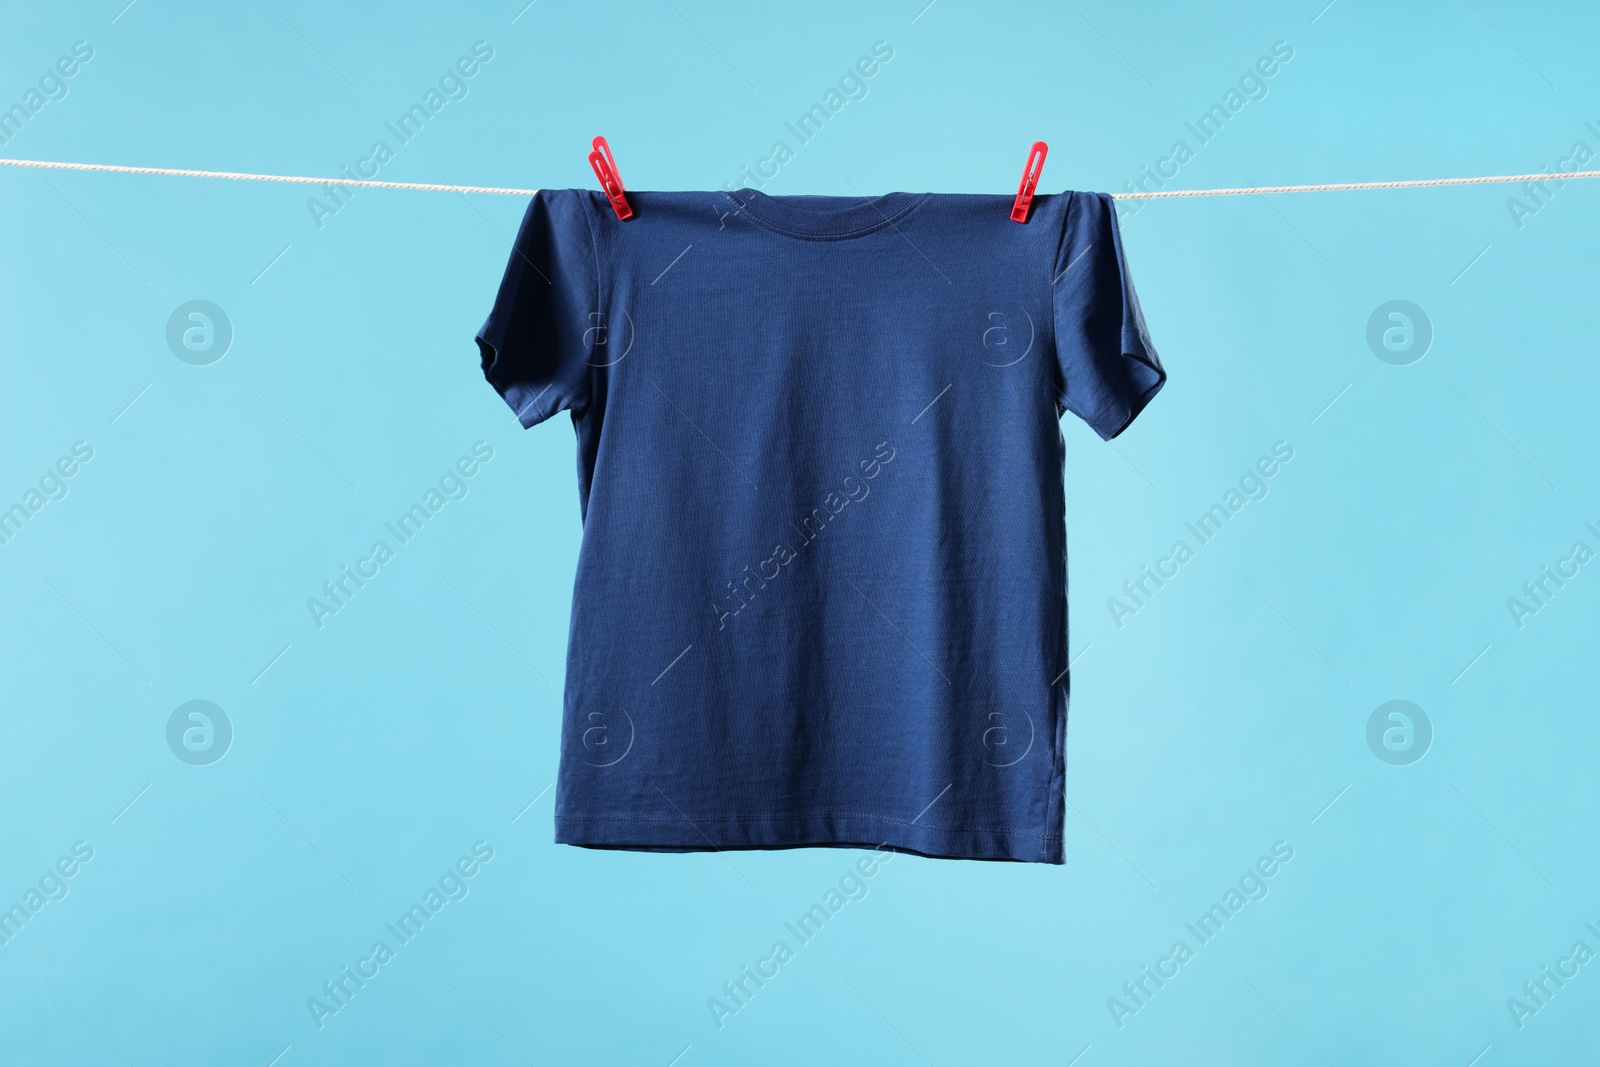 Photo of One t-shirt drying on washing line against light blue background. Space for text